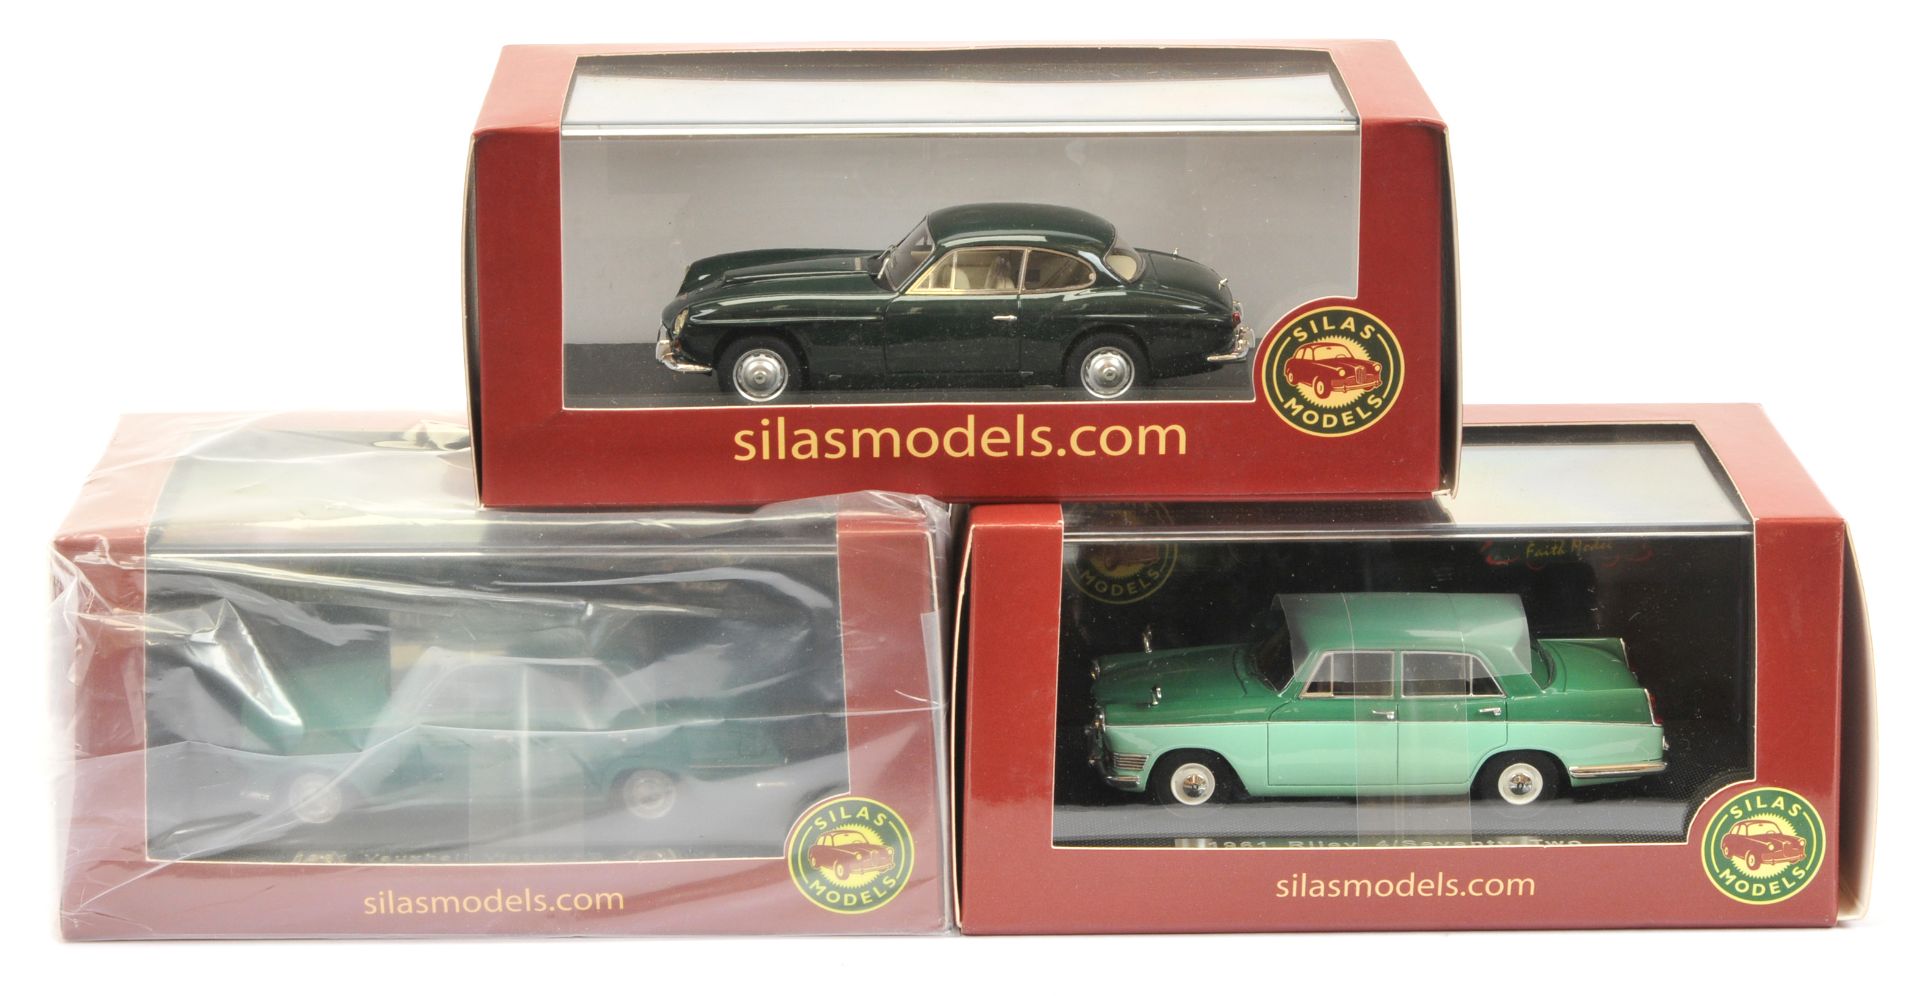 Silas Models group of cars including 1961 Riley 4/Seventy Two